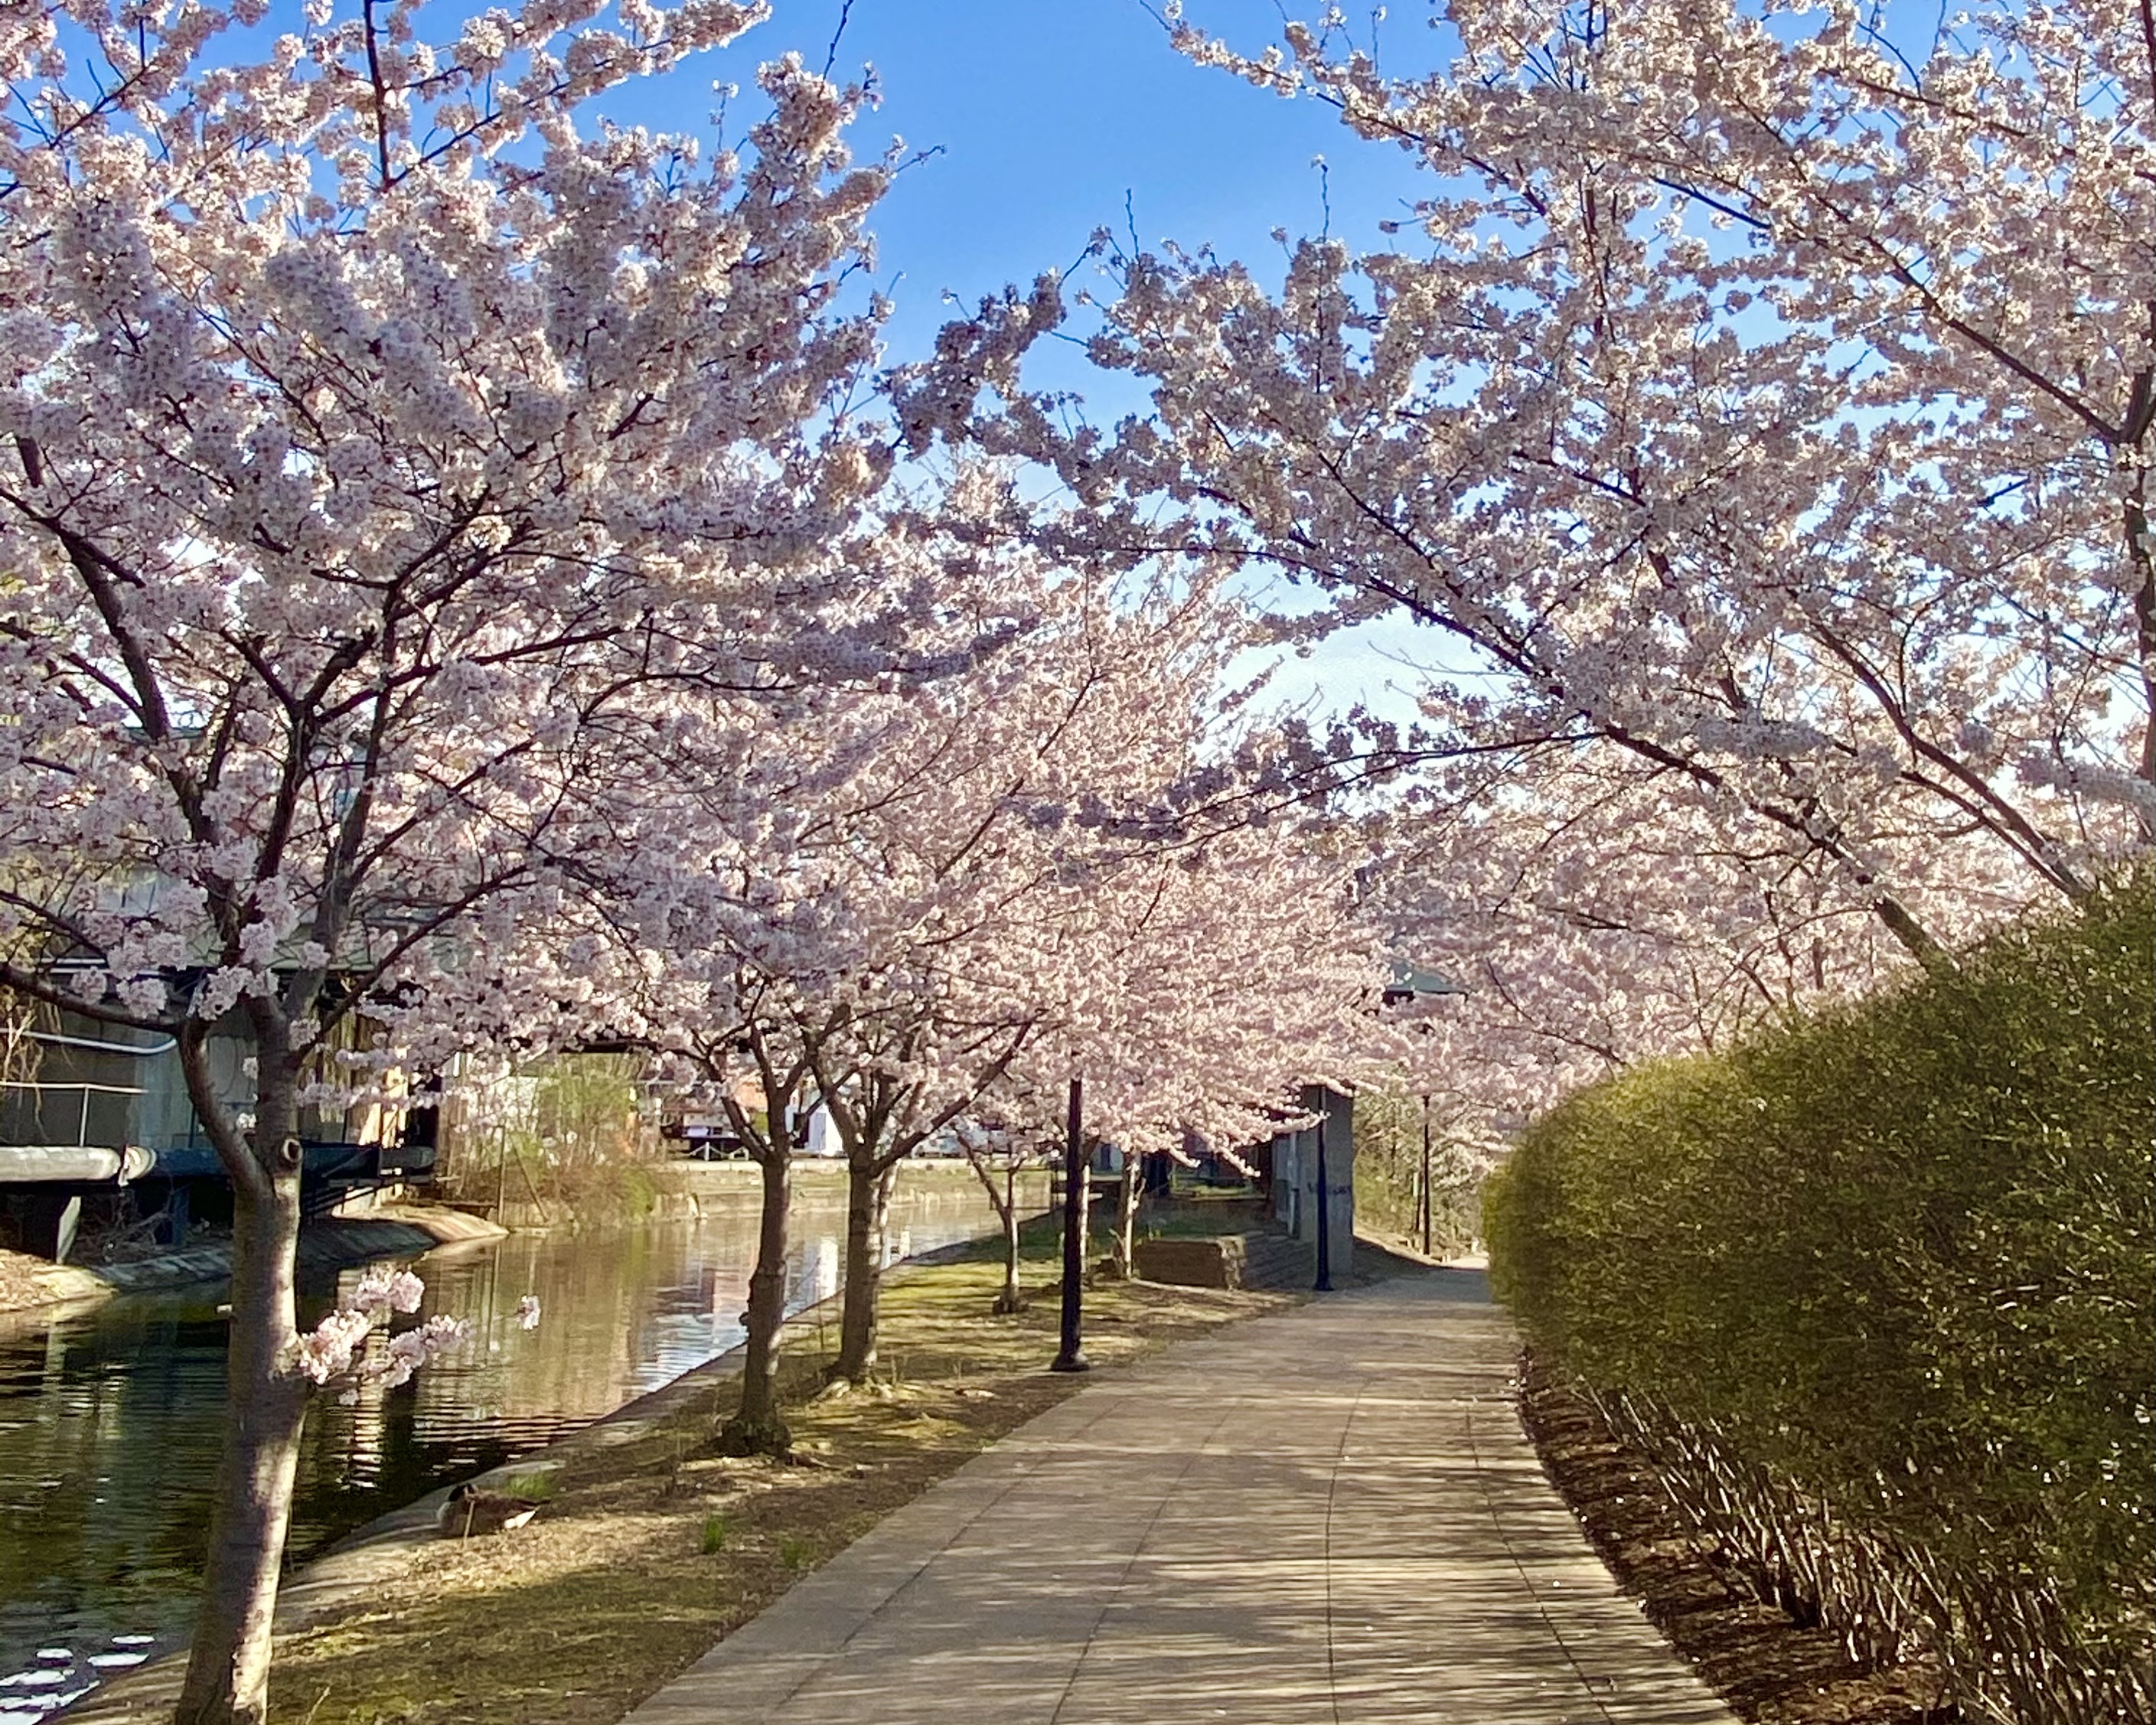 Light pink blossoms on trees lining a concrete path